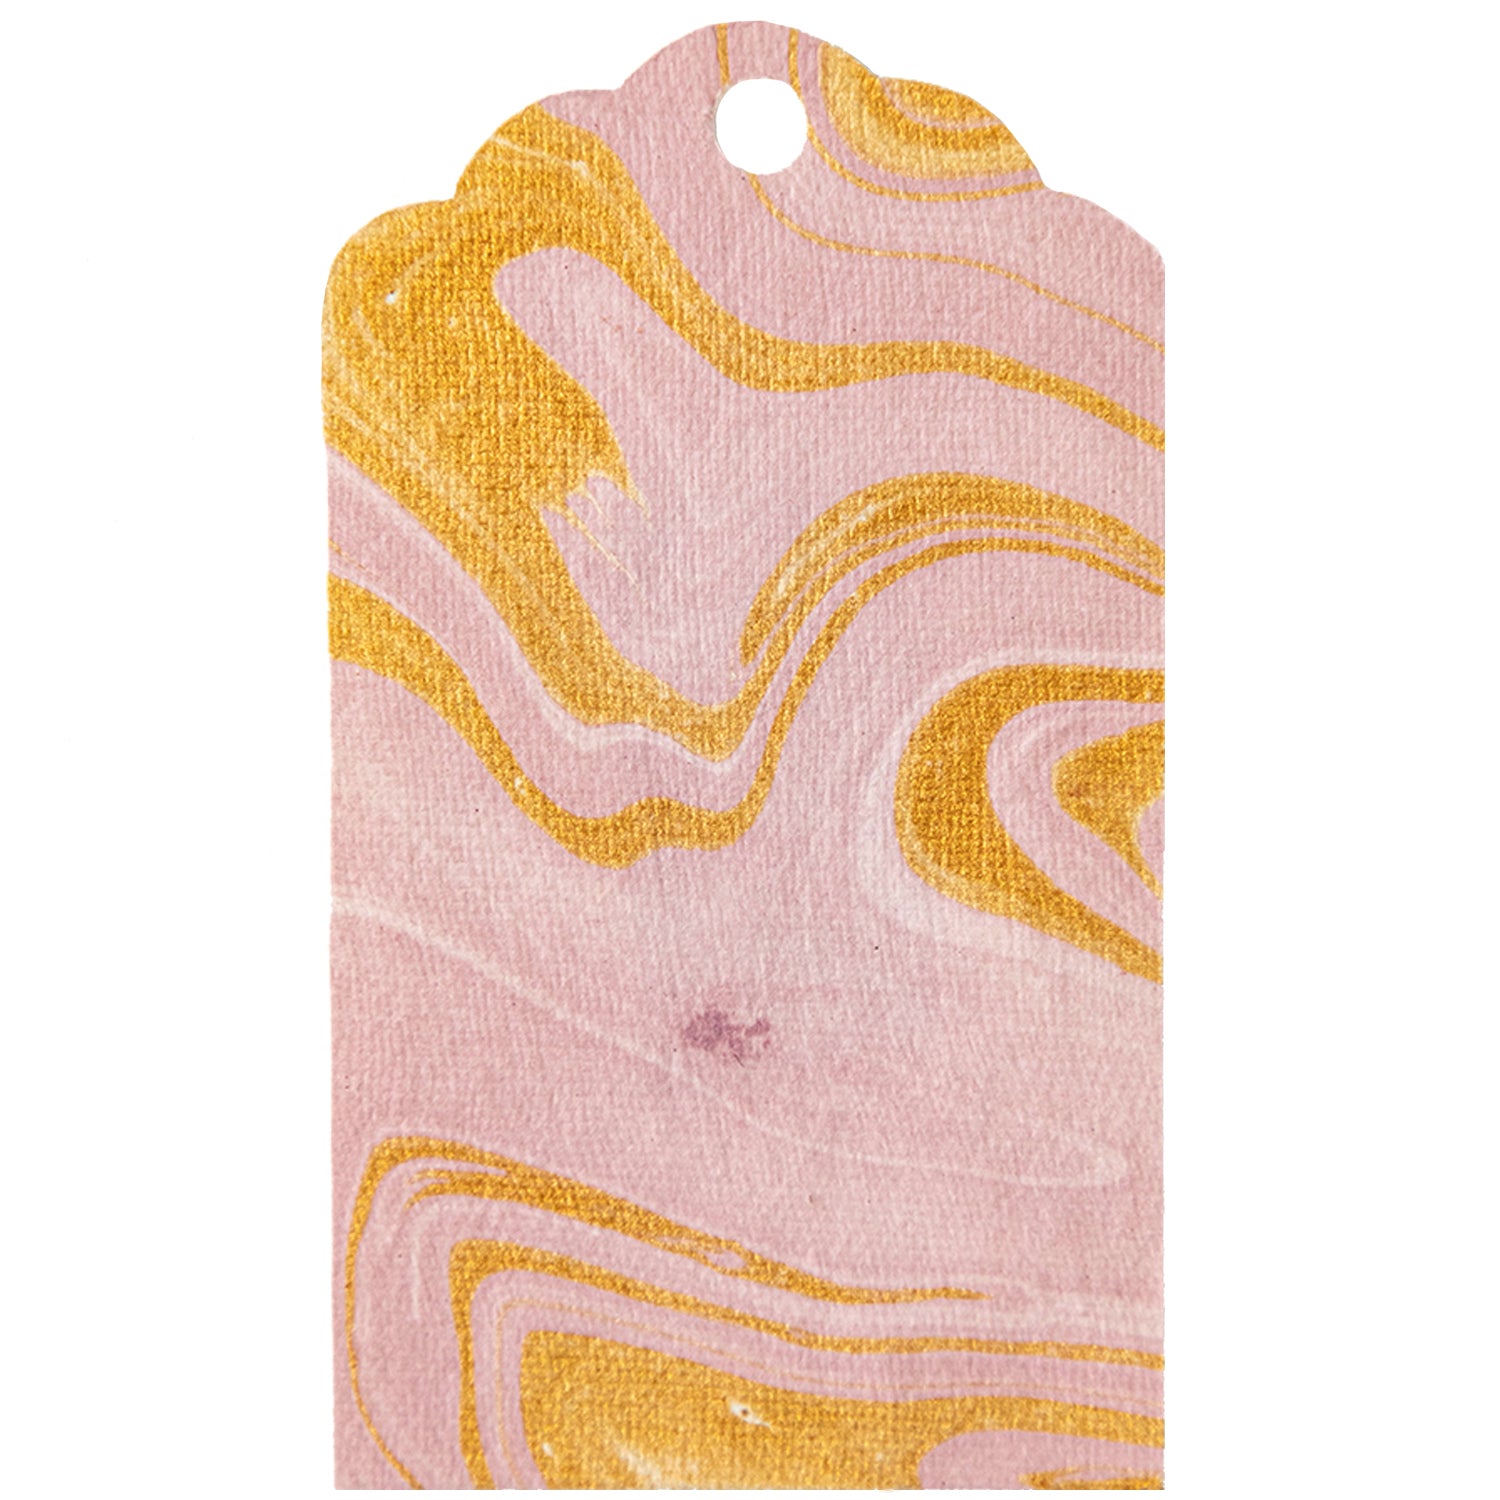 A unique Vein Marbled Gift Tag made from handmade papers by Hester &amp; Cook.